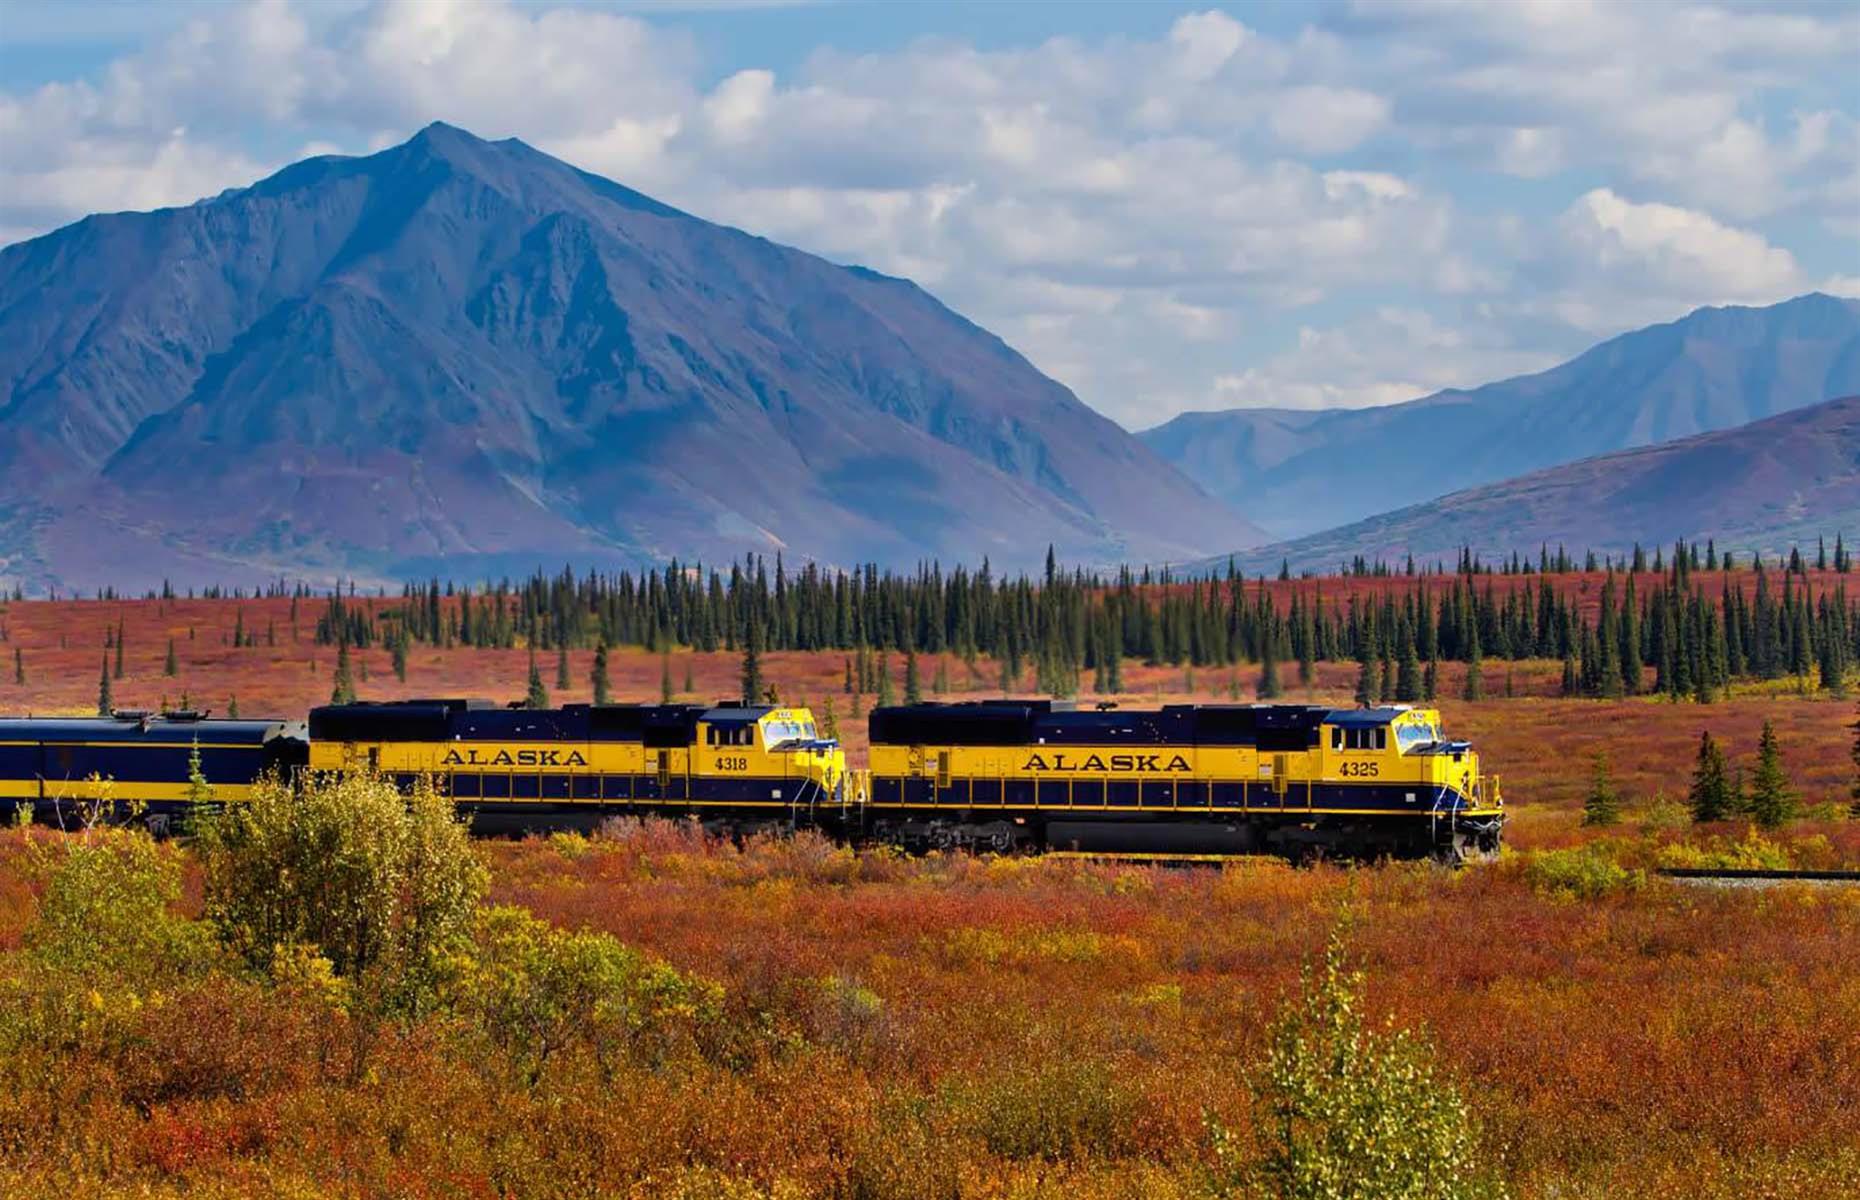 As the name suggests, this breathtaking train journey leads its passengers through the mighty Denali National Park. The Alaska Railroad's flagship train, Denali Star embarks on a 12-hour ride between Anchorage and Fairbanks via Wasilla, Talkeetna and Denali. Along the 365-mile (587km) journey, the train rushes past rivers and mountains and offers expansive panoramas of Hurricane Gulch from the top of a 296-foot (90.2m) bridge.